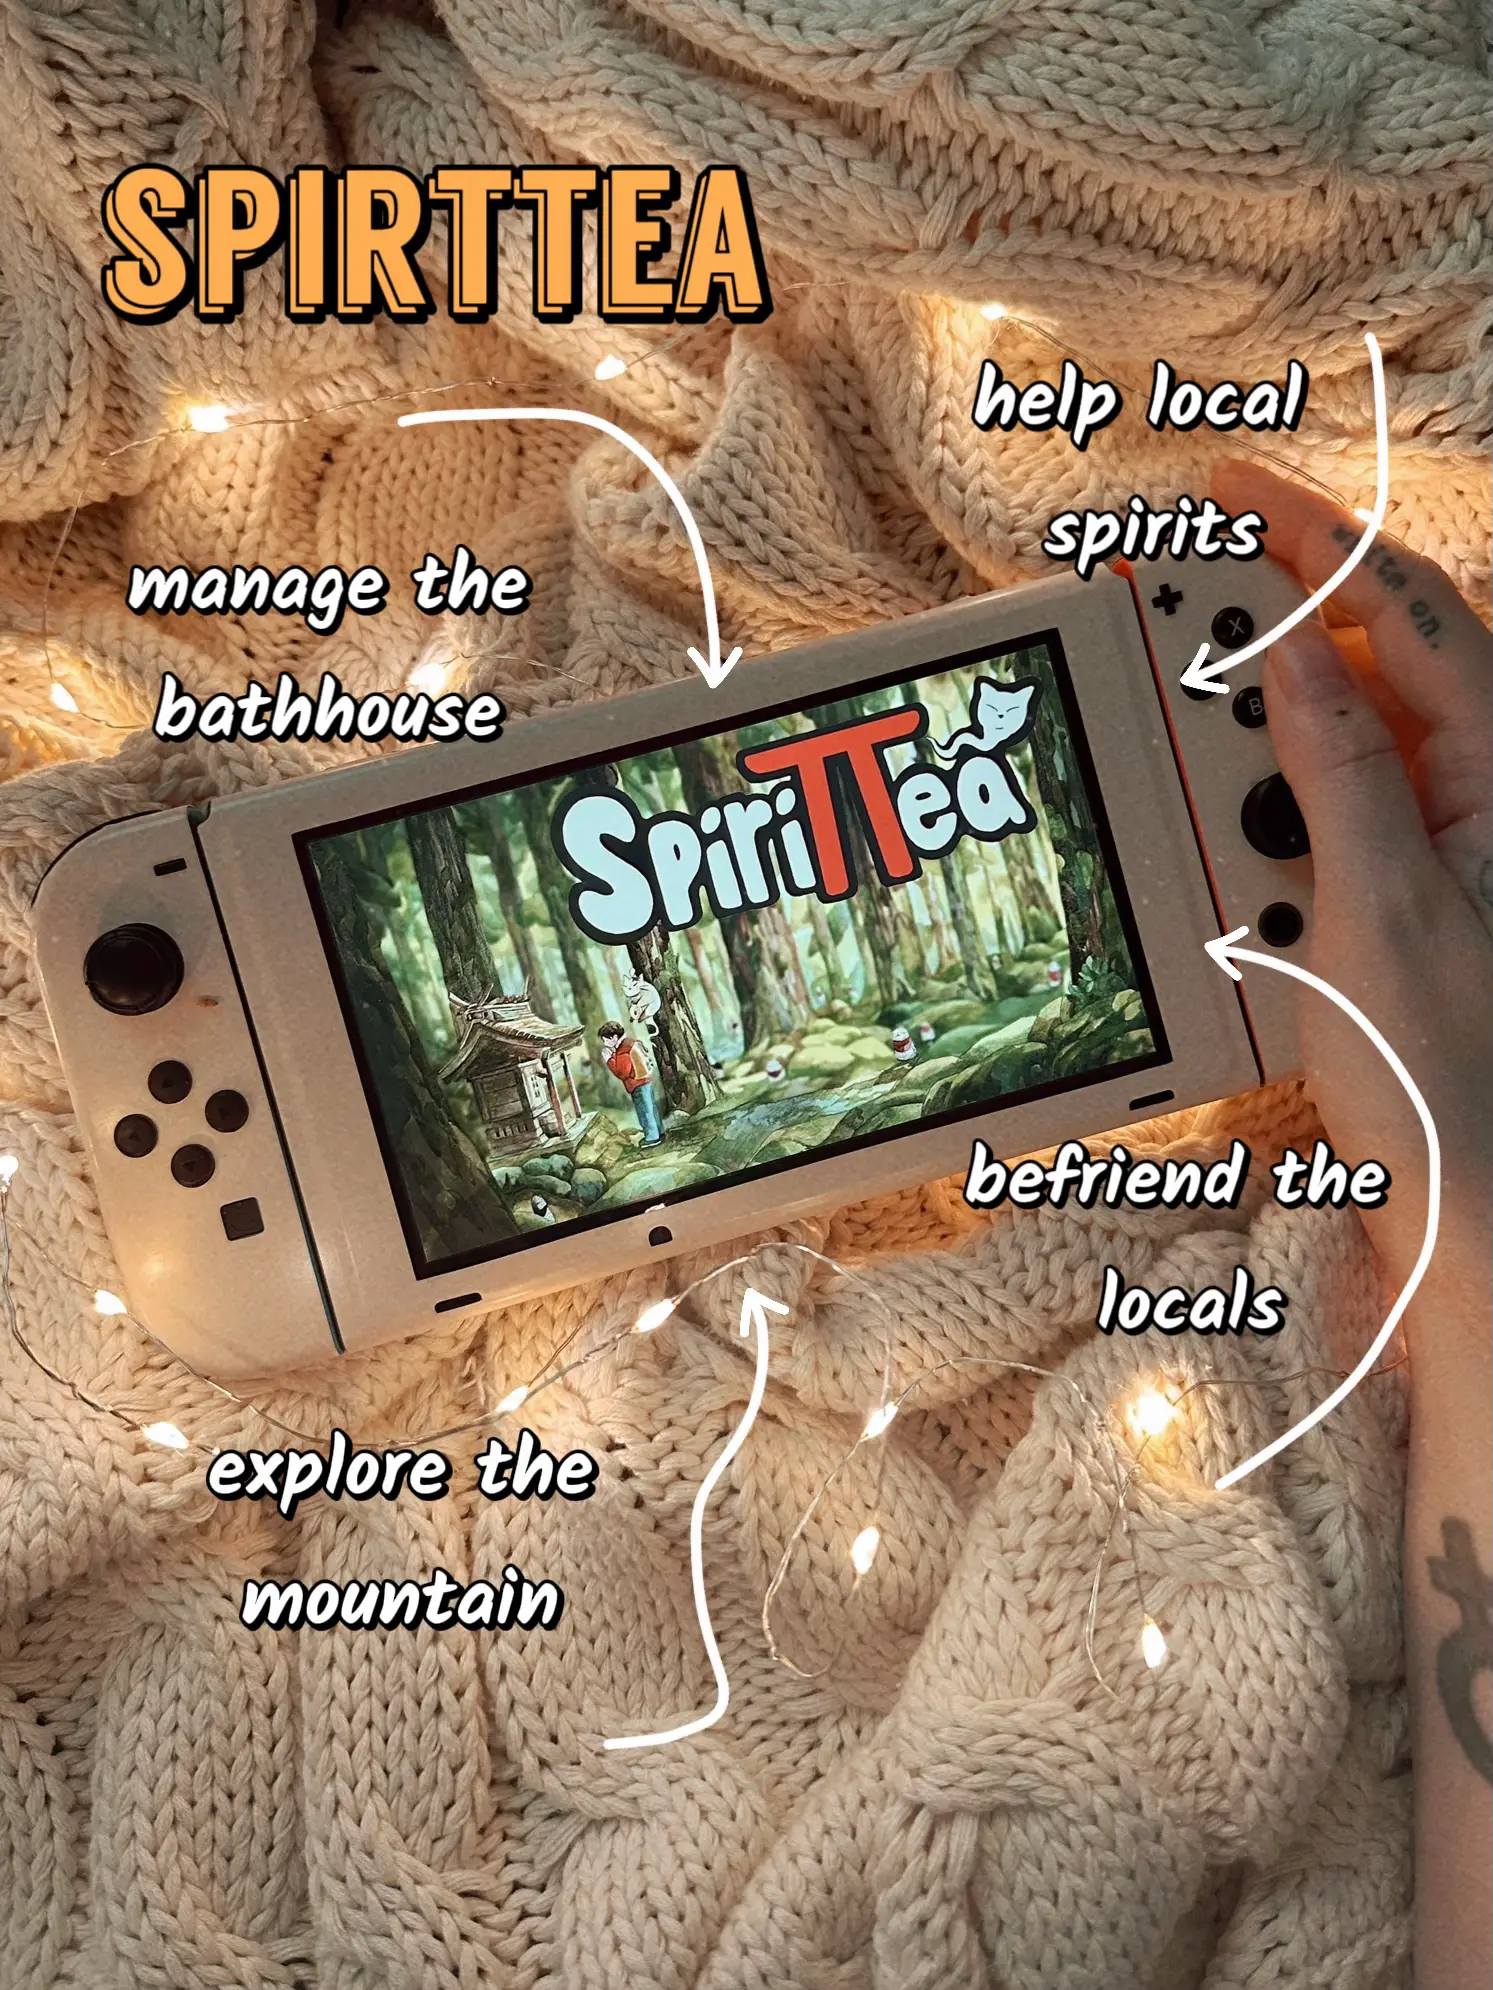  A hand holding a video game controller with a screen that says "spirittea" on it.